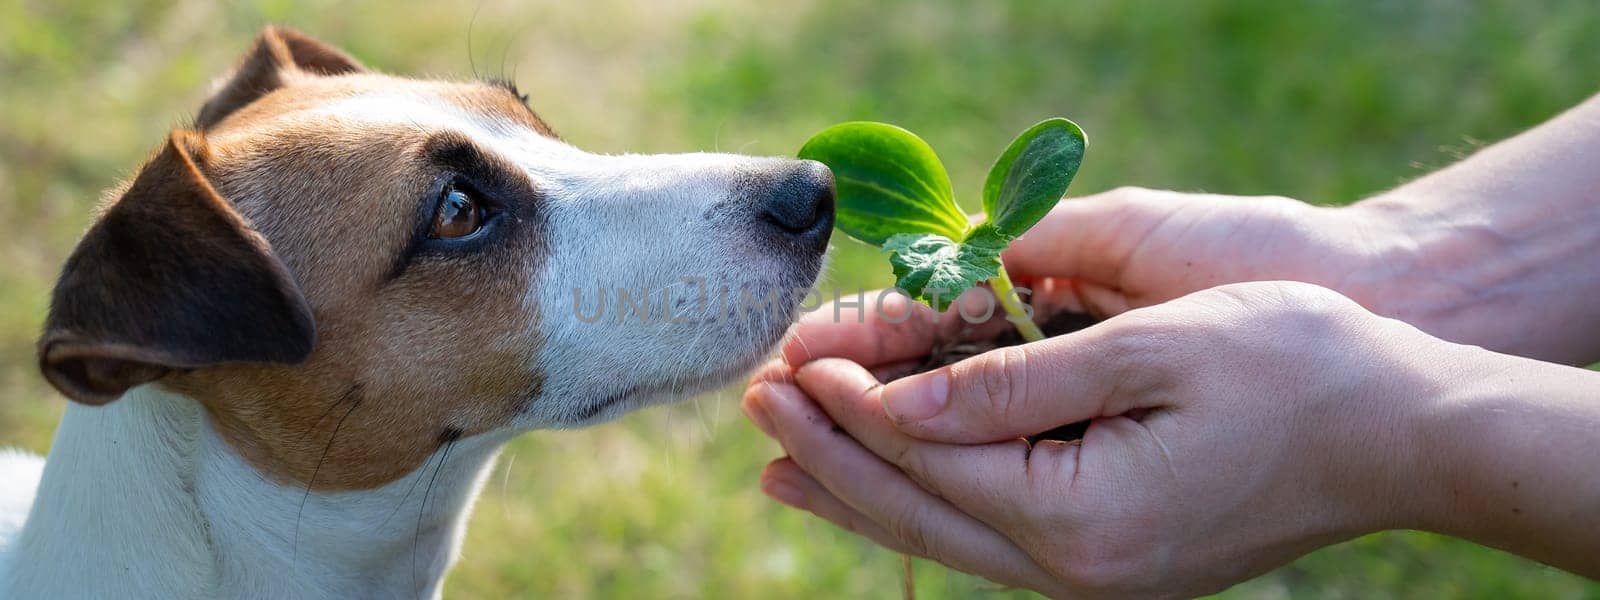 A woman holds a sprout in her hands next to the muzzle of a Jack Russell dog outdoors. by mrwed54